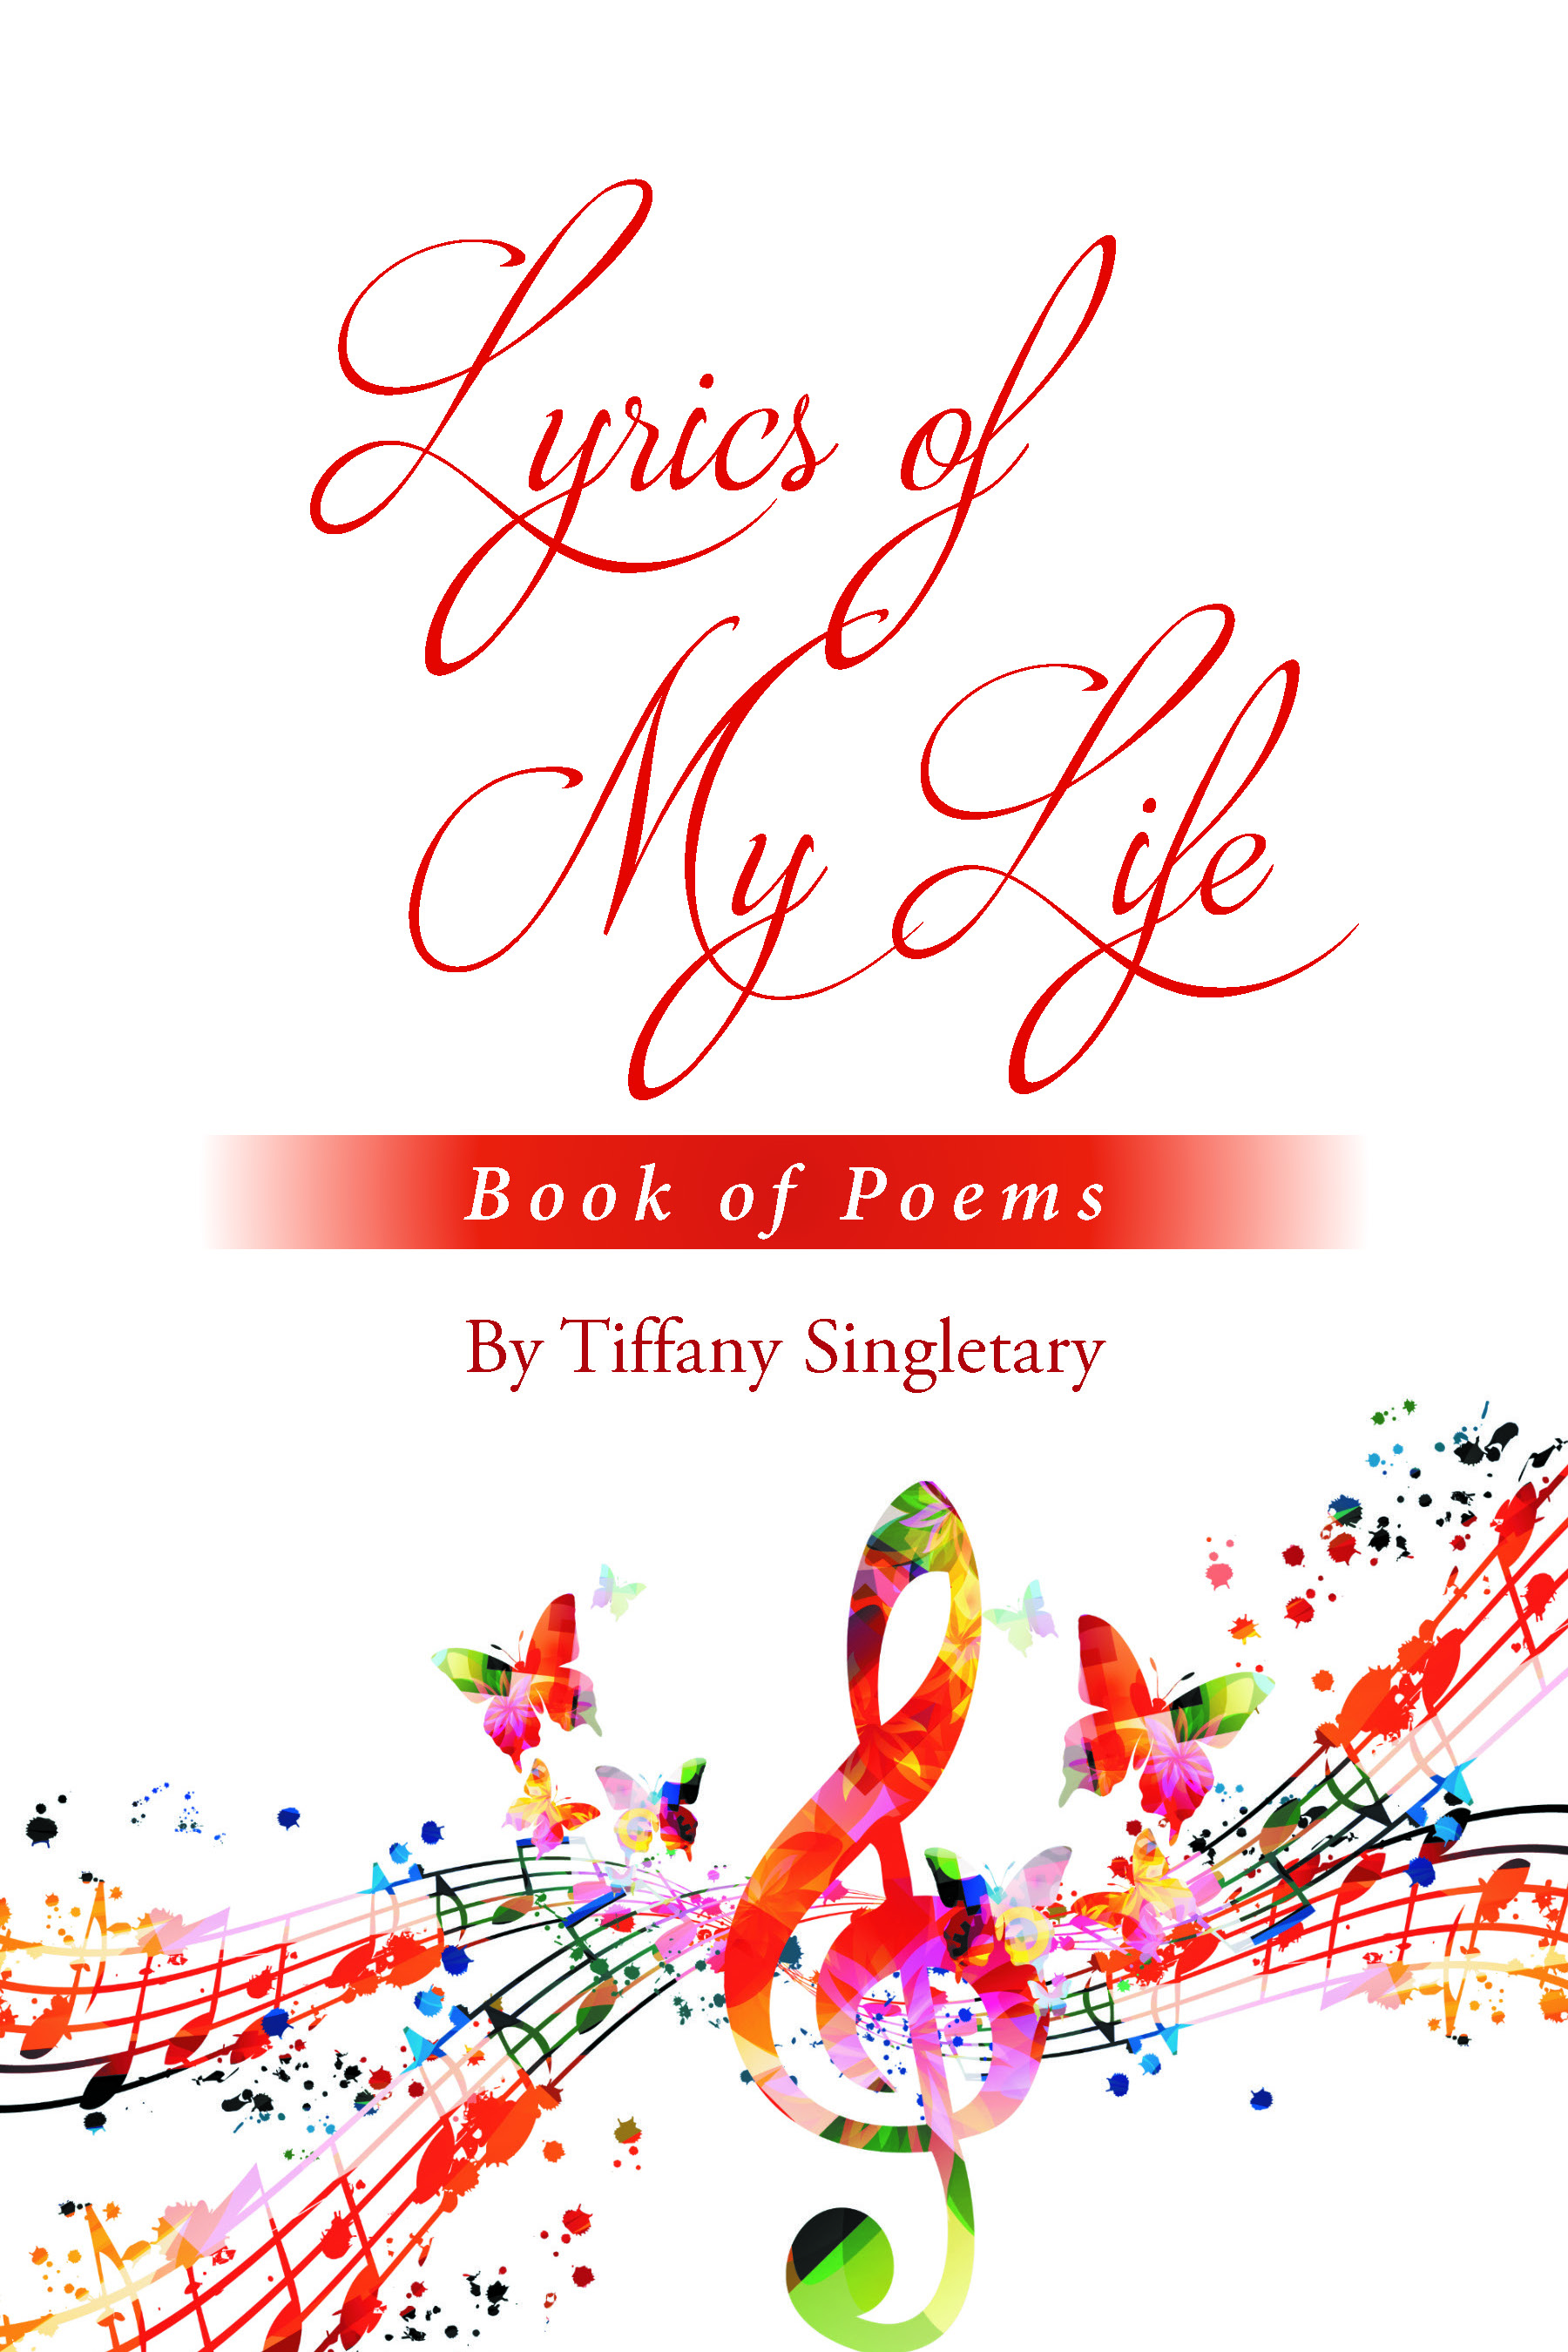 Tiffany Singletary’s Newly Released "Lyrics of My Life: Book of Poems" is an Emotional Journey Through Verse